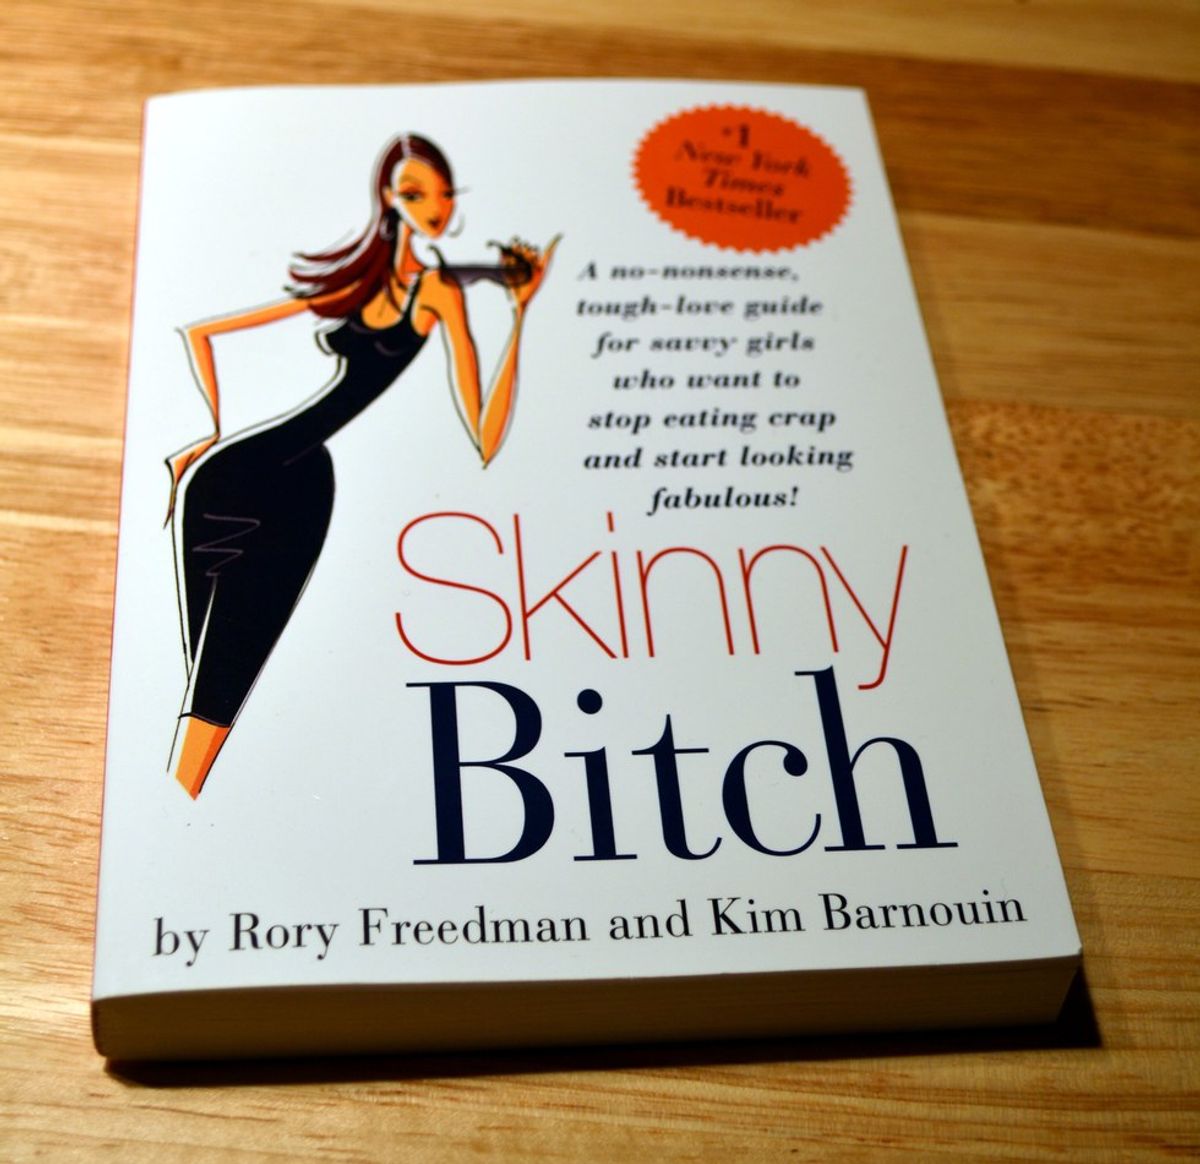 How My Life Has Changed 8 Months After Reading Skinny Bitch